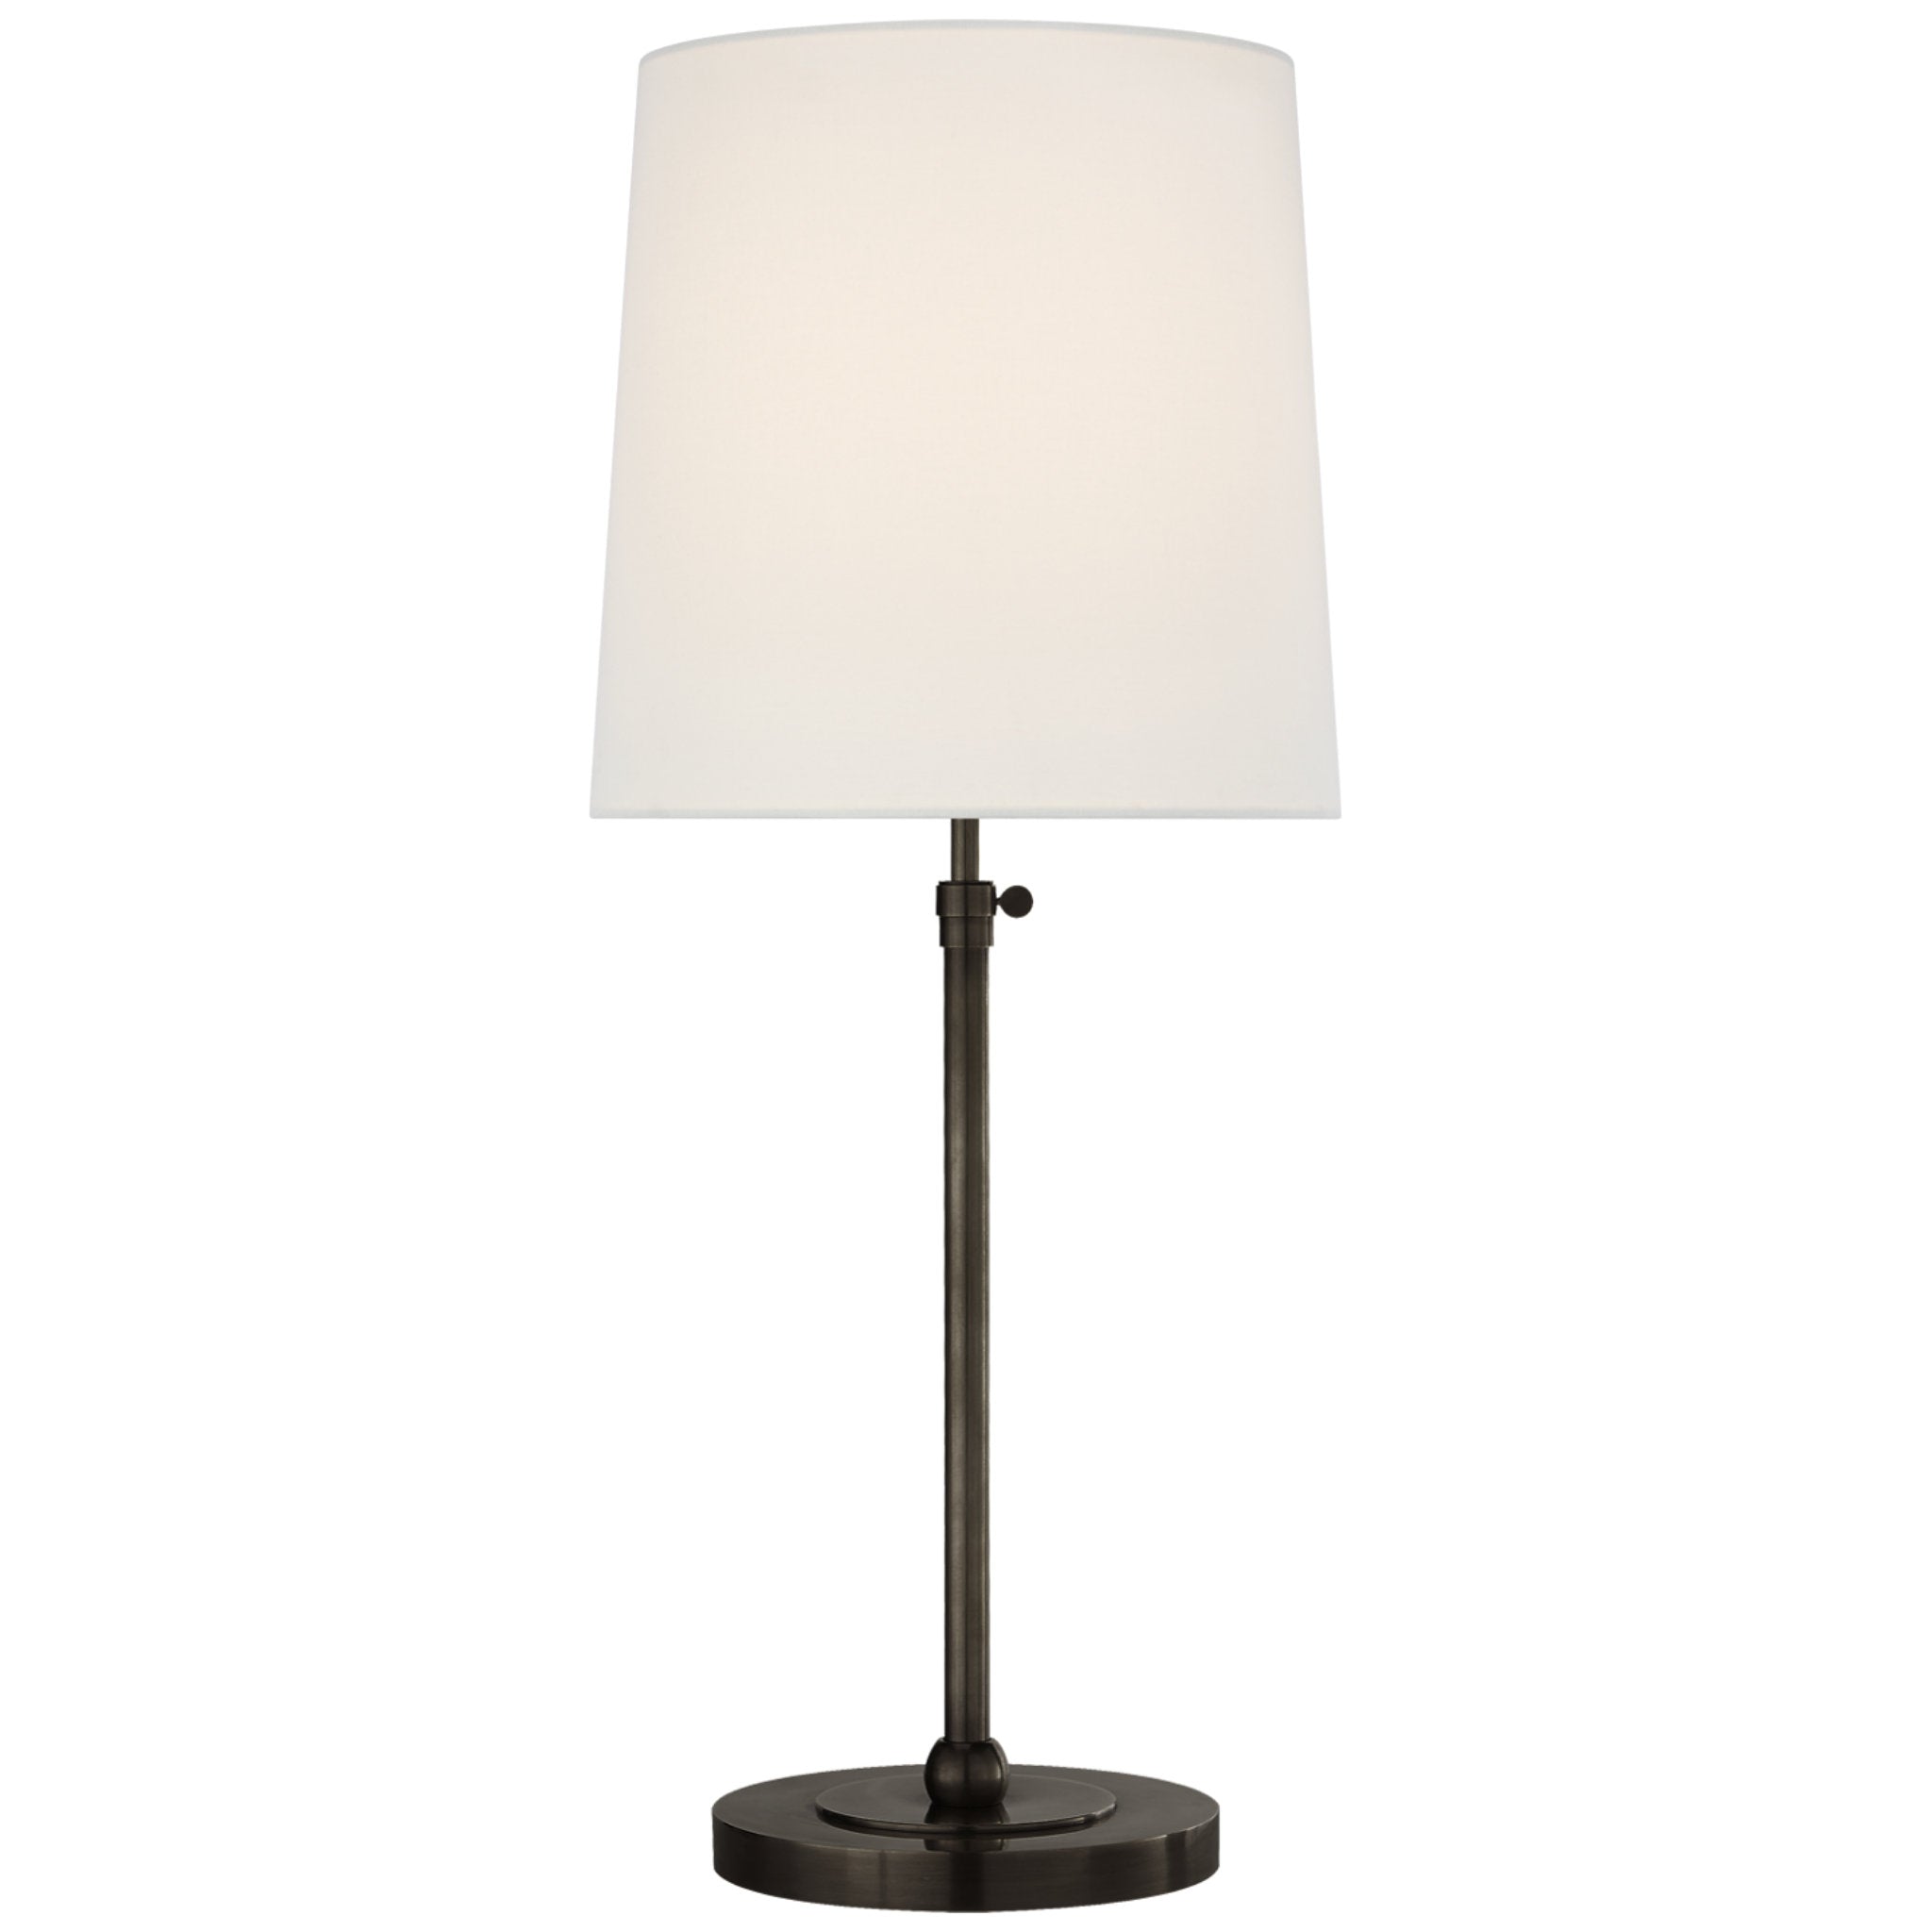 Thomas O'Brien Bryant Large Table Lamp in Bronze with Linen Shade